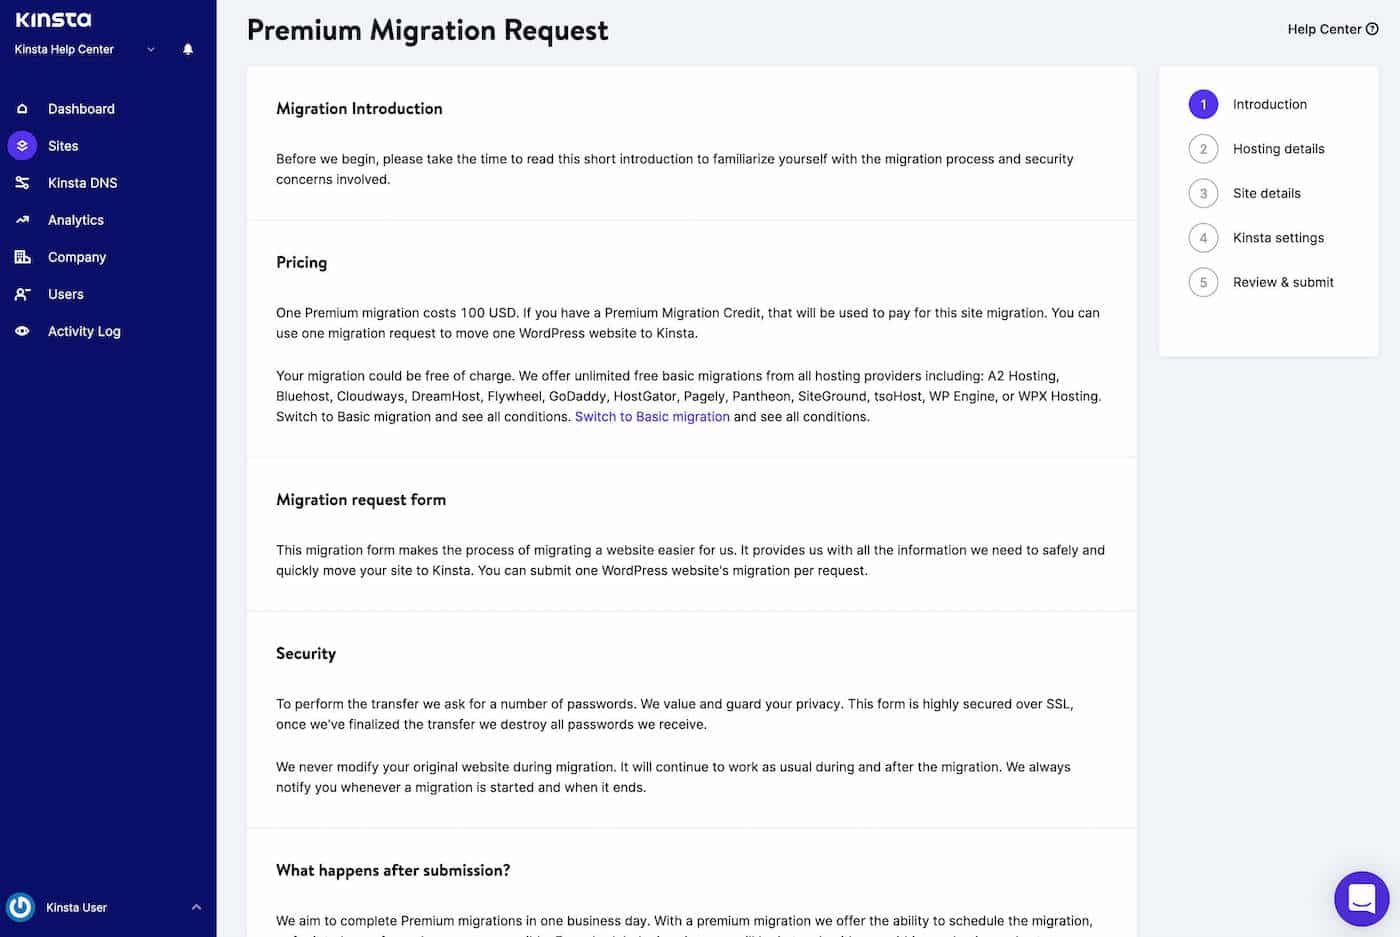 Premium migration request introduction and conditions.